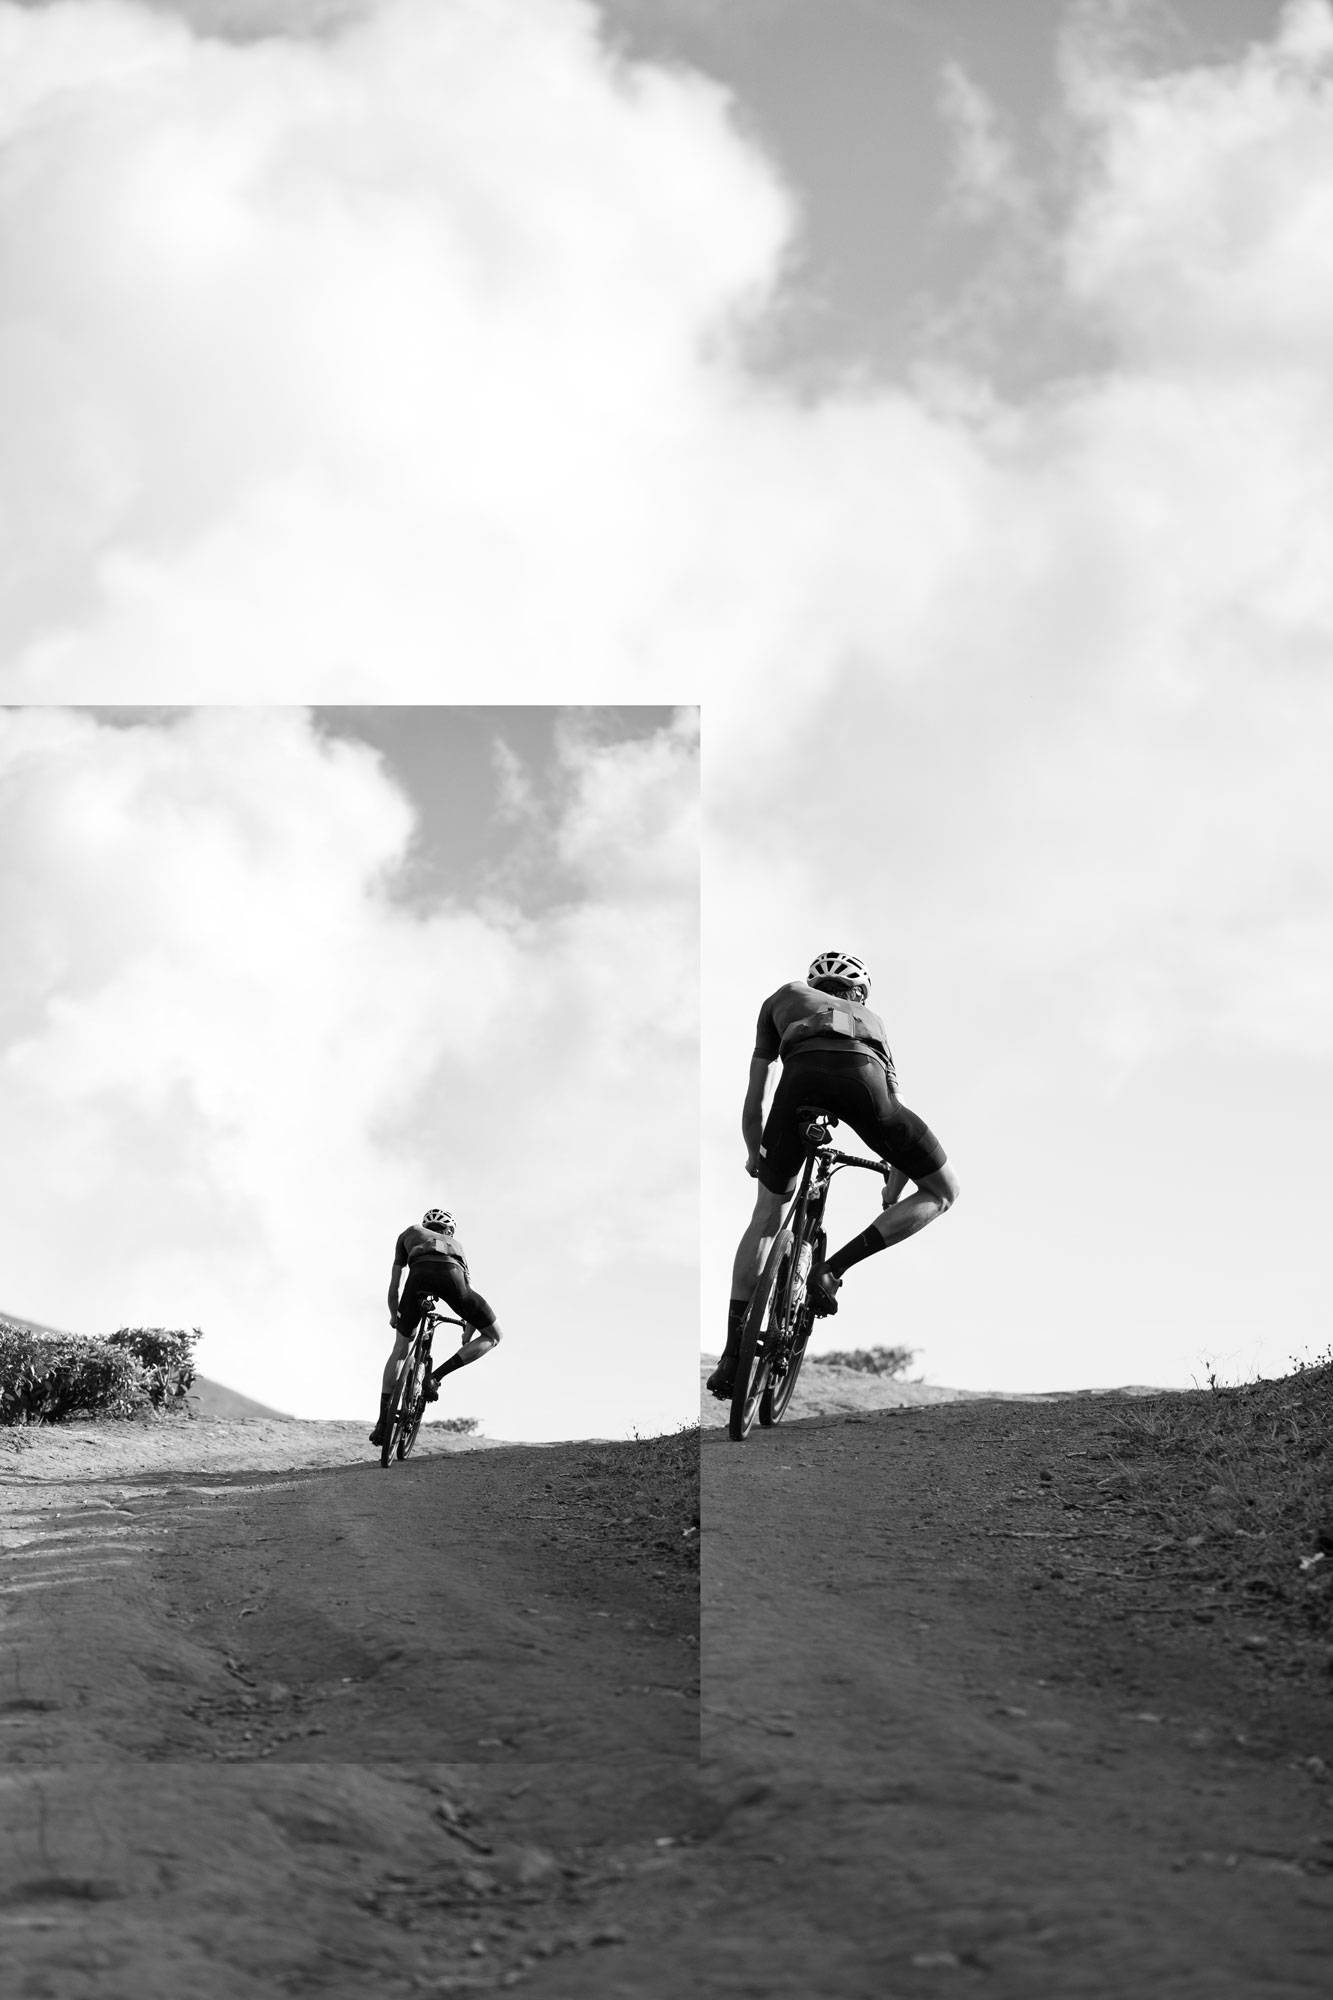 Marin riding his bike in black and white